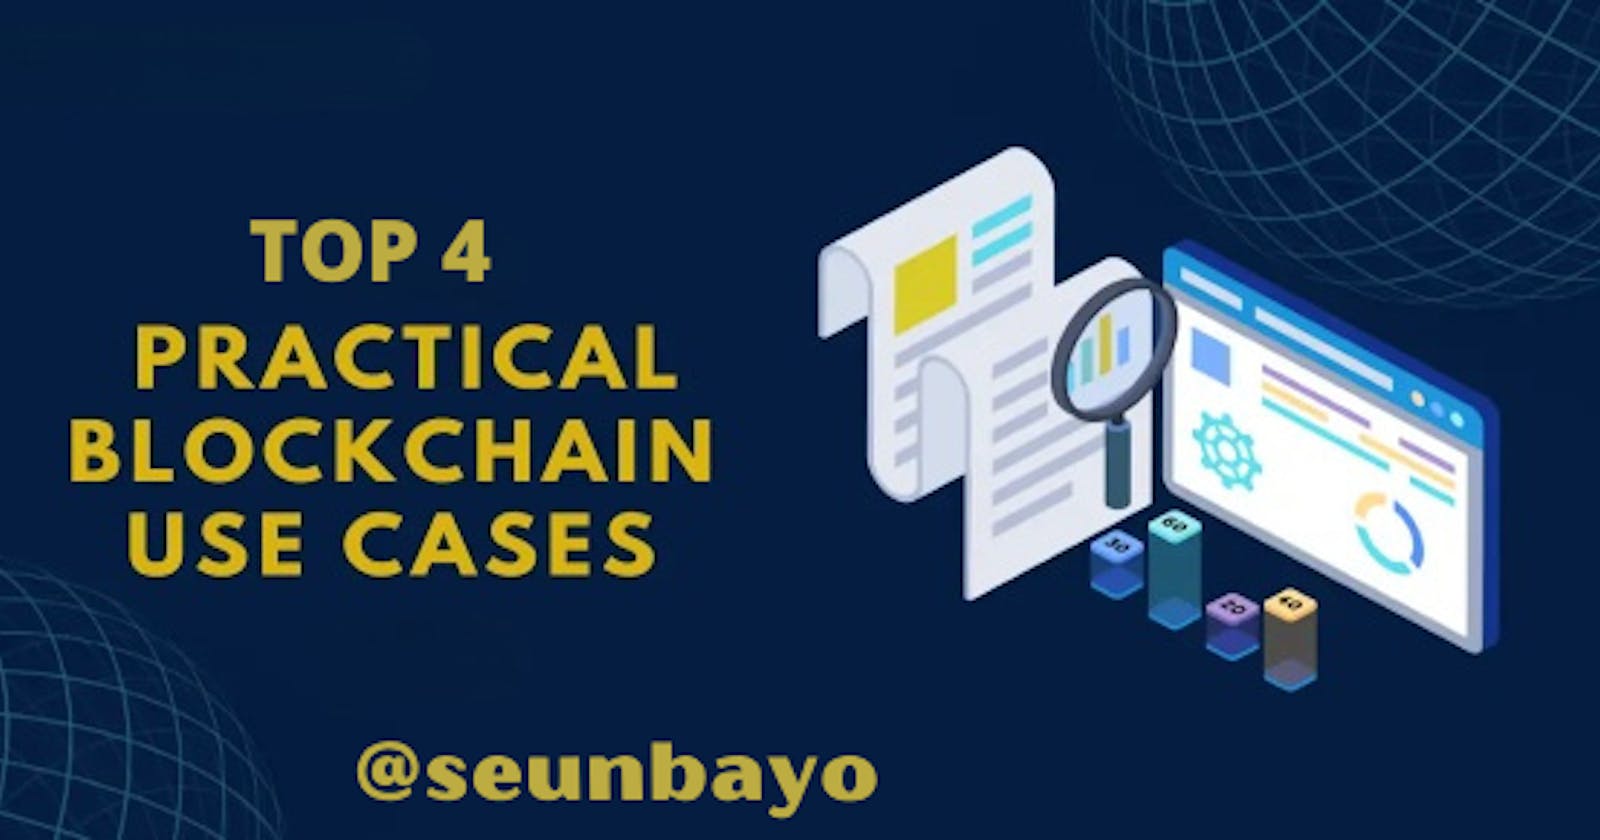 My Top 4 Blockchain Use Cases